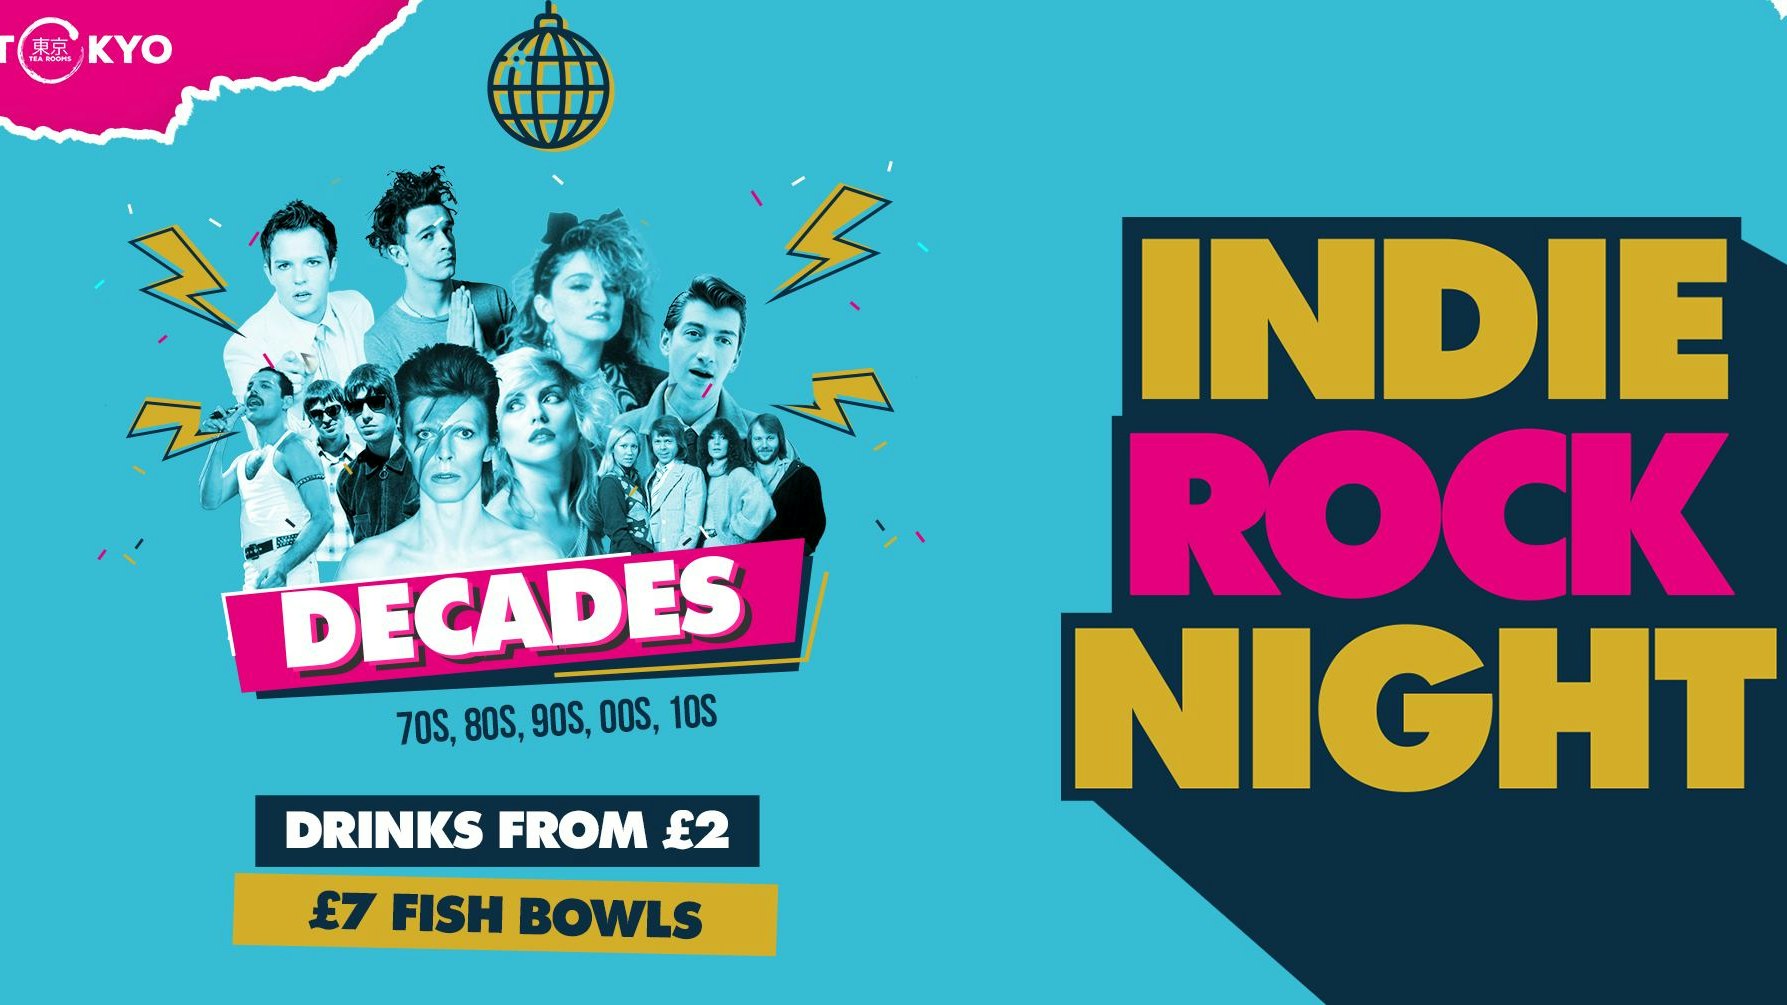 Indie Rock Night ∙ DECADES (60s, 70s, 80s, 90s, 00s, 10s) *ONLY 10 £2 TICKETS LEFT*